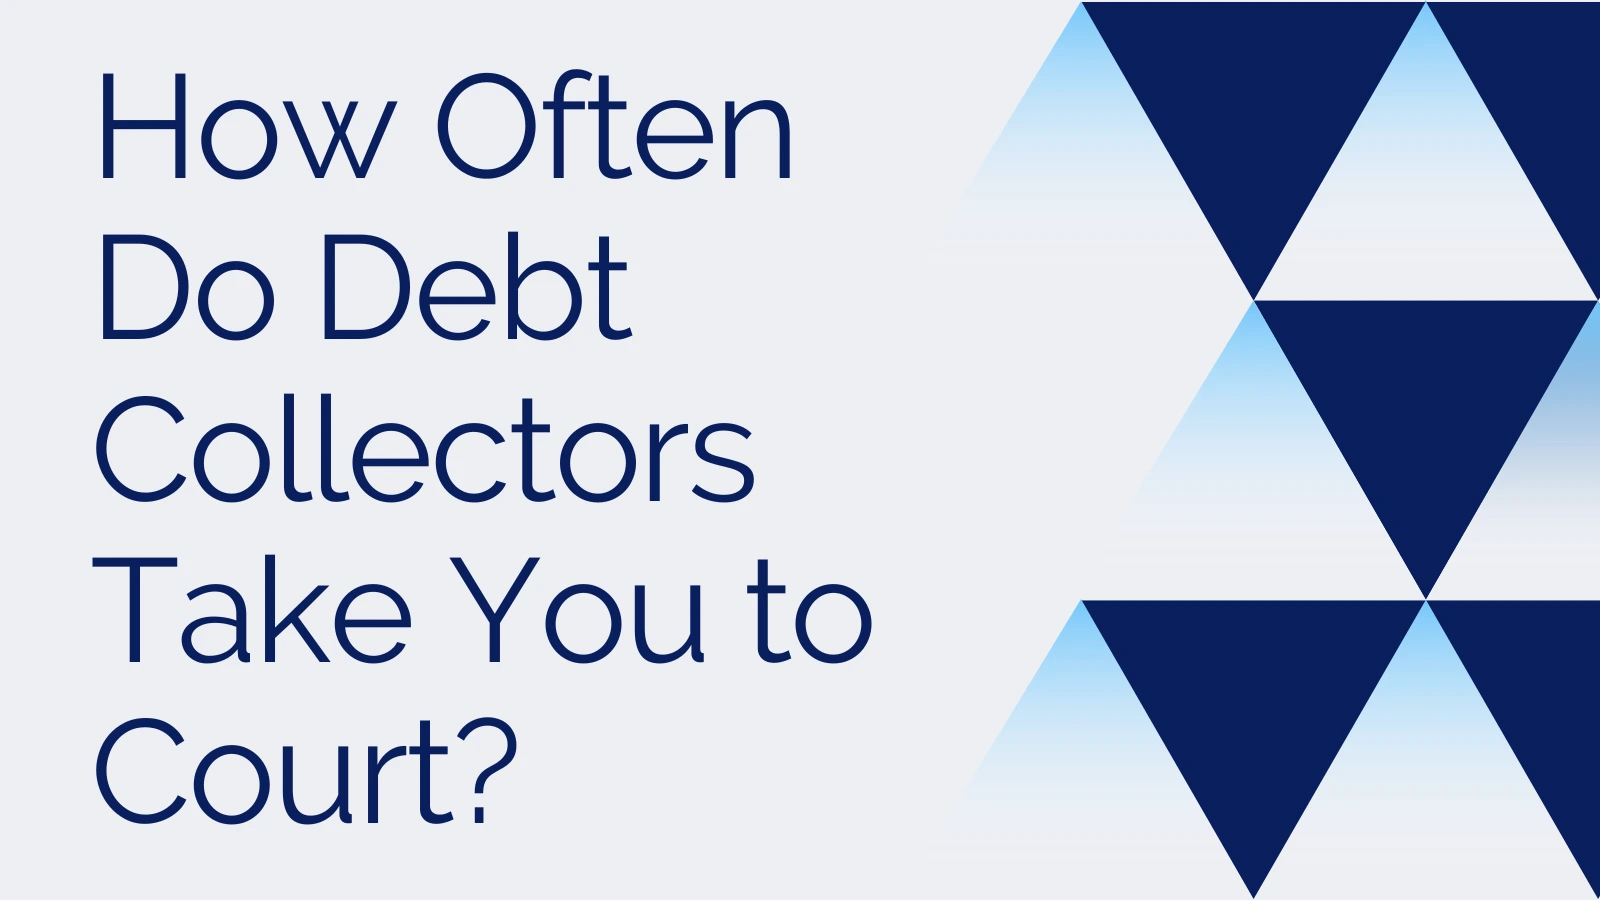 How Often Do Debt Collectors Take You to Court